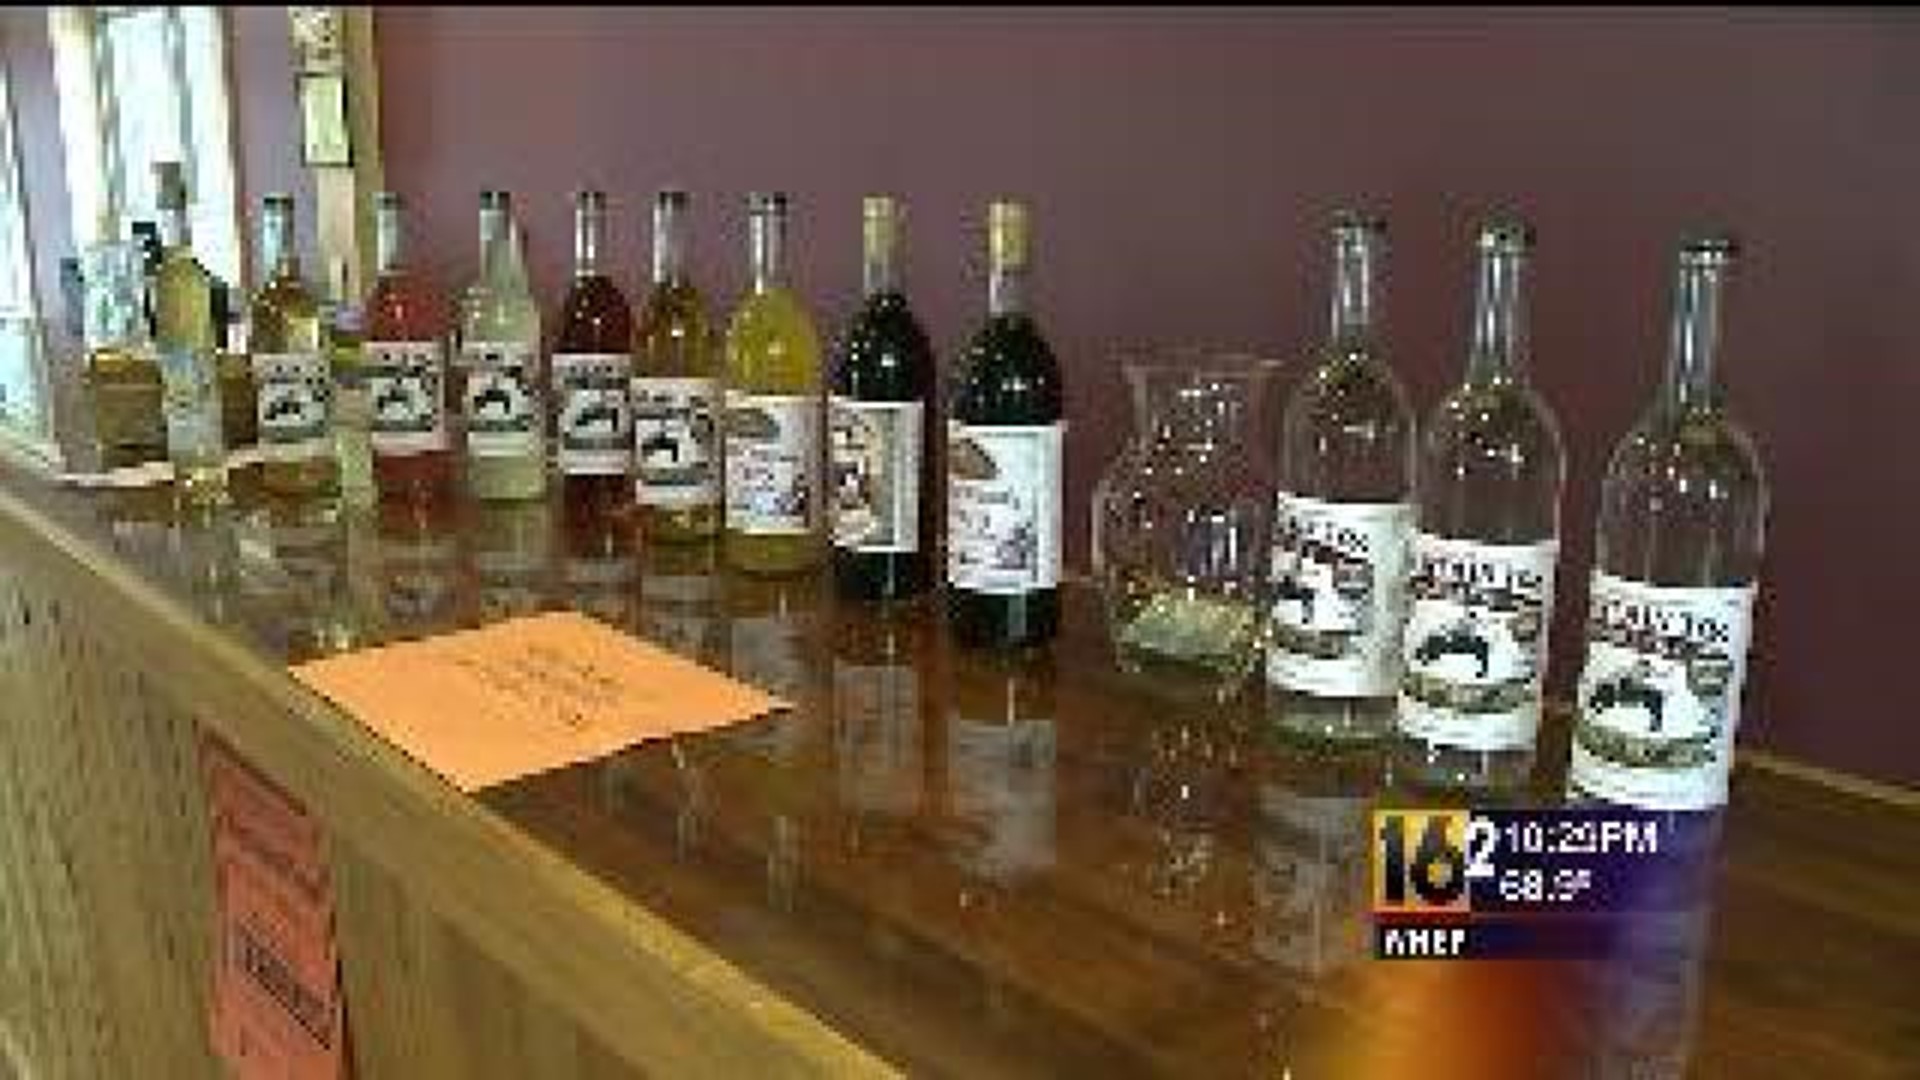 Winemakers Branching Out With Distillery